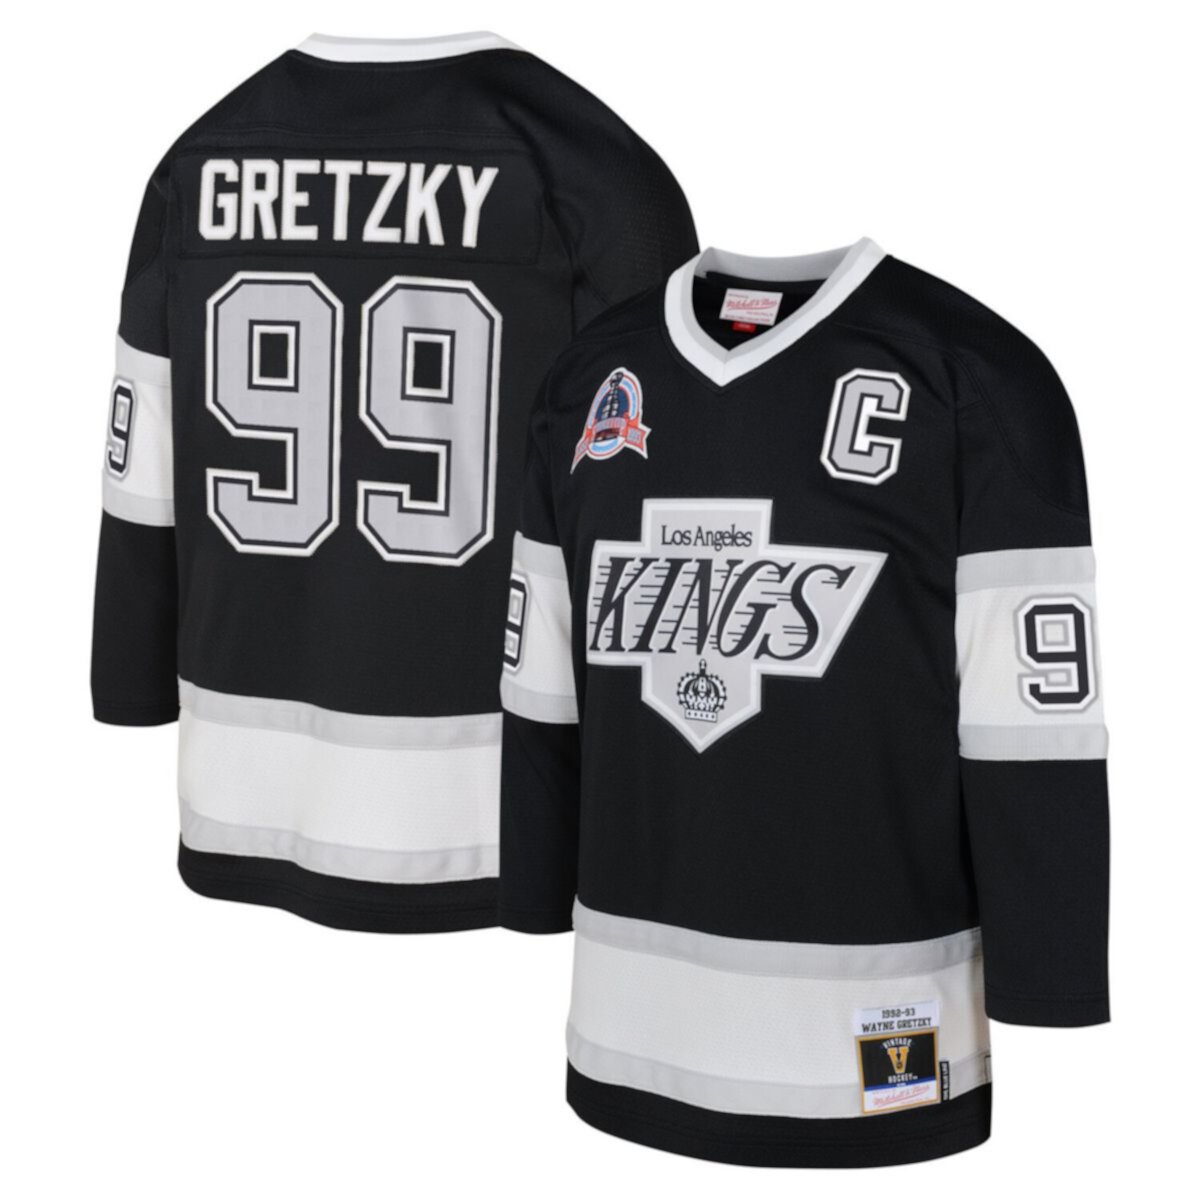 Youth Mitchell & Ness Wayne Gretzky Black Los Angeles Kings 1992 Blue Line Player Jersey Unbranded